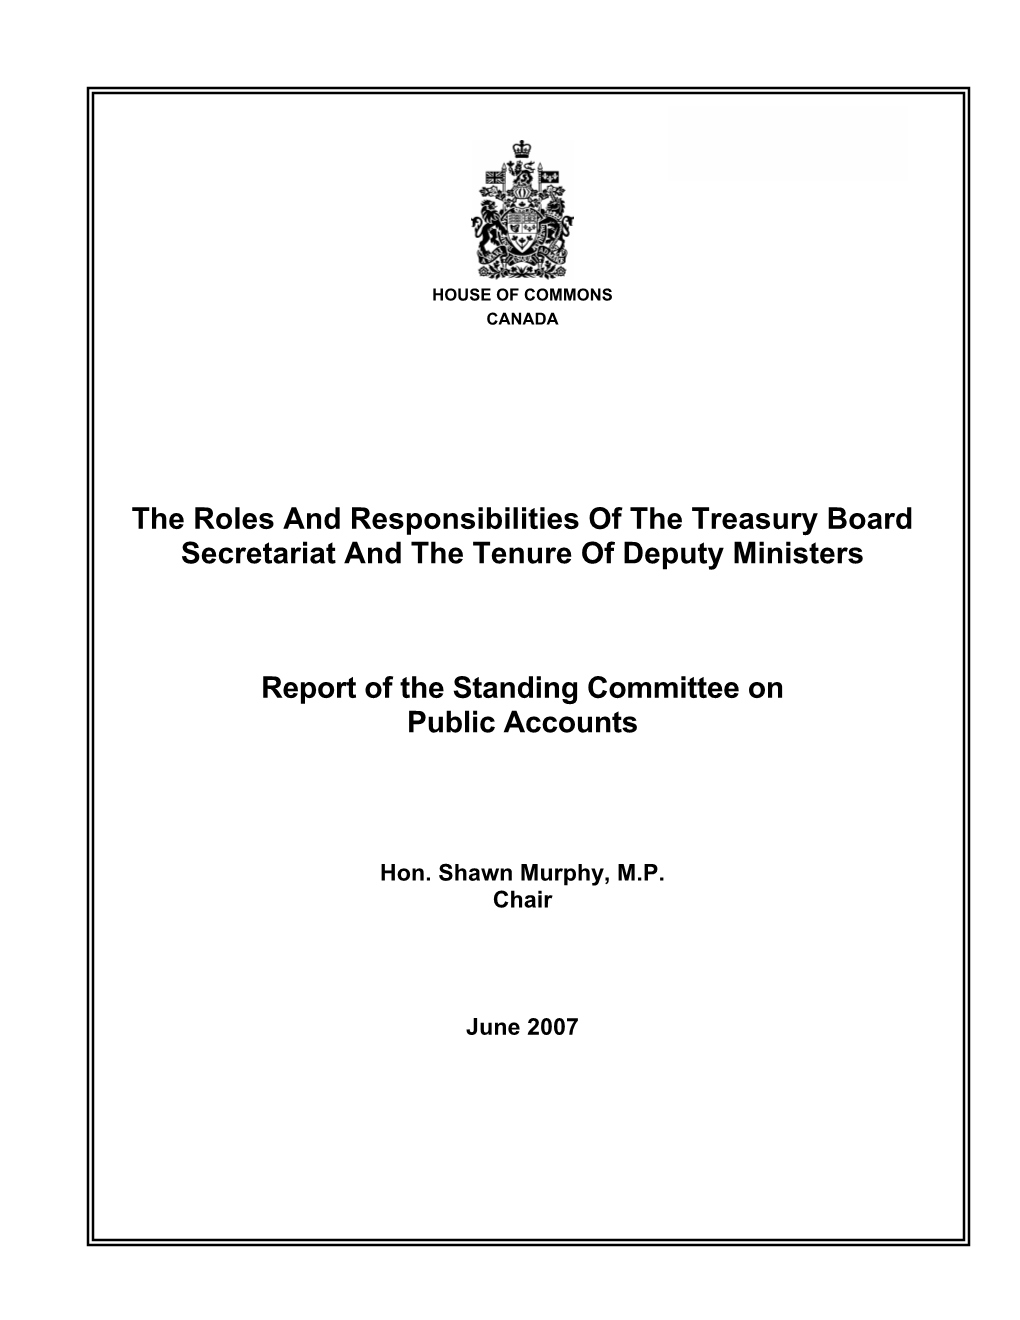 The Roles and Responsibilities of the Treasury Board Secretariat and the Tenure of Deputy Ministers